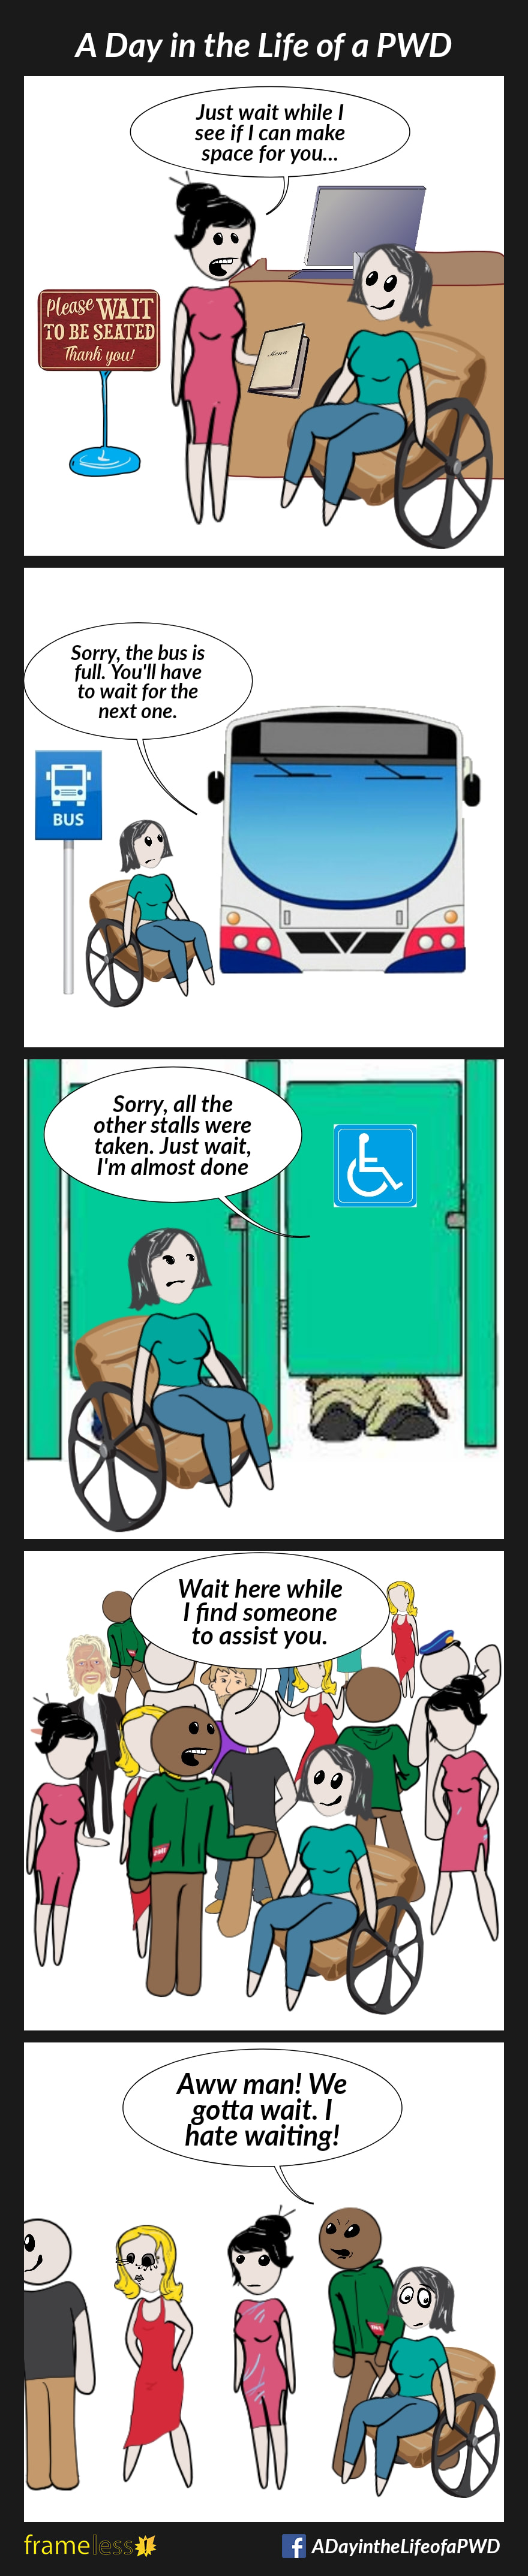 COMIC STRIP 
A Day in the Life of a PWD (Person With a Disability) 

Frame 1:
A woman in a wheelchair has entered a restaurant, and is speaking to the hostess.
HOSTESS: Just wait while I see if I can make space for you...

Frame 2:
The woman is preparing to board a bus.
DRIVER: Sorry, the bus is full. You'll have to wait for the next one.

Frame 3:
The woman is outside the accessible stall in a public restroom. It is occupied. 
OCCUPANT: Sorry, all the other stalls were taken. Just wait, I'm almost done.

Frame 4:
The woman has arrived at a crowded event, and is speaking to a host.
HOST: Wait here while I find someone to assist you.

Frame 5:
The woman and her friend have joined the end of a line up.
FRIEND (irritated): Aw, man! We gotta wait. I hate waiting!
The woman rolls her eyes.